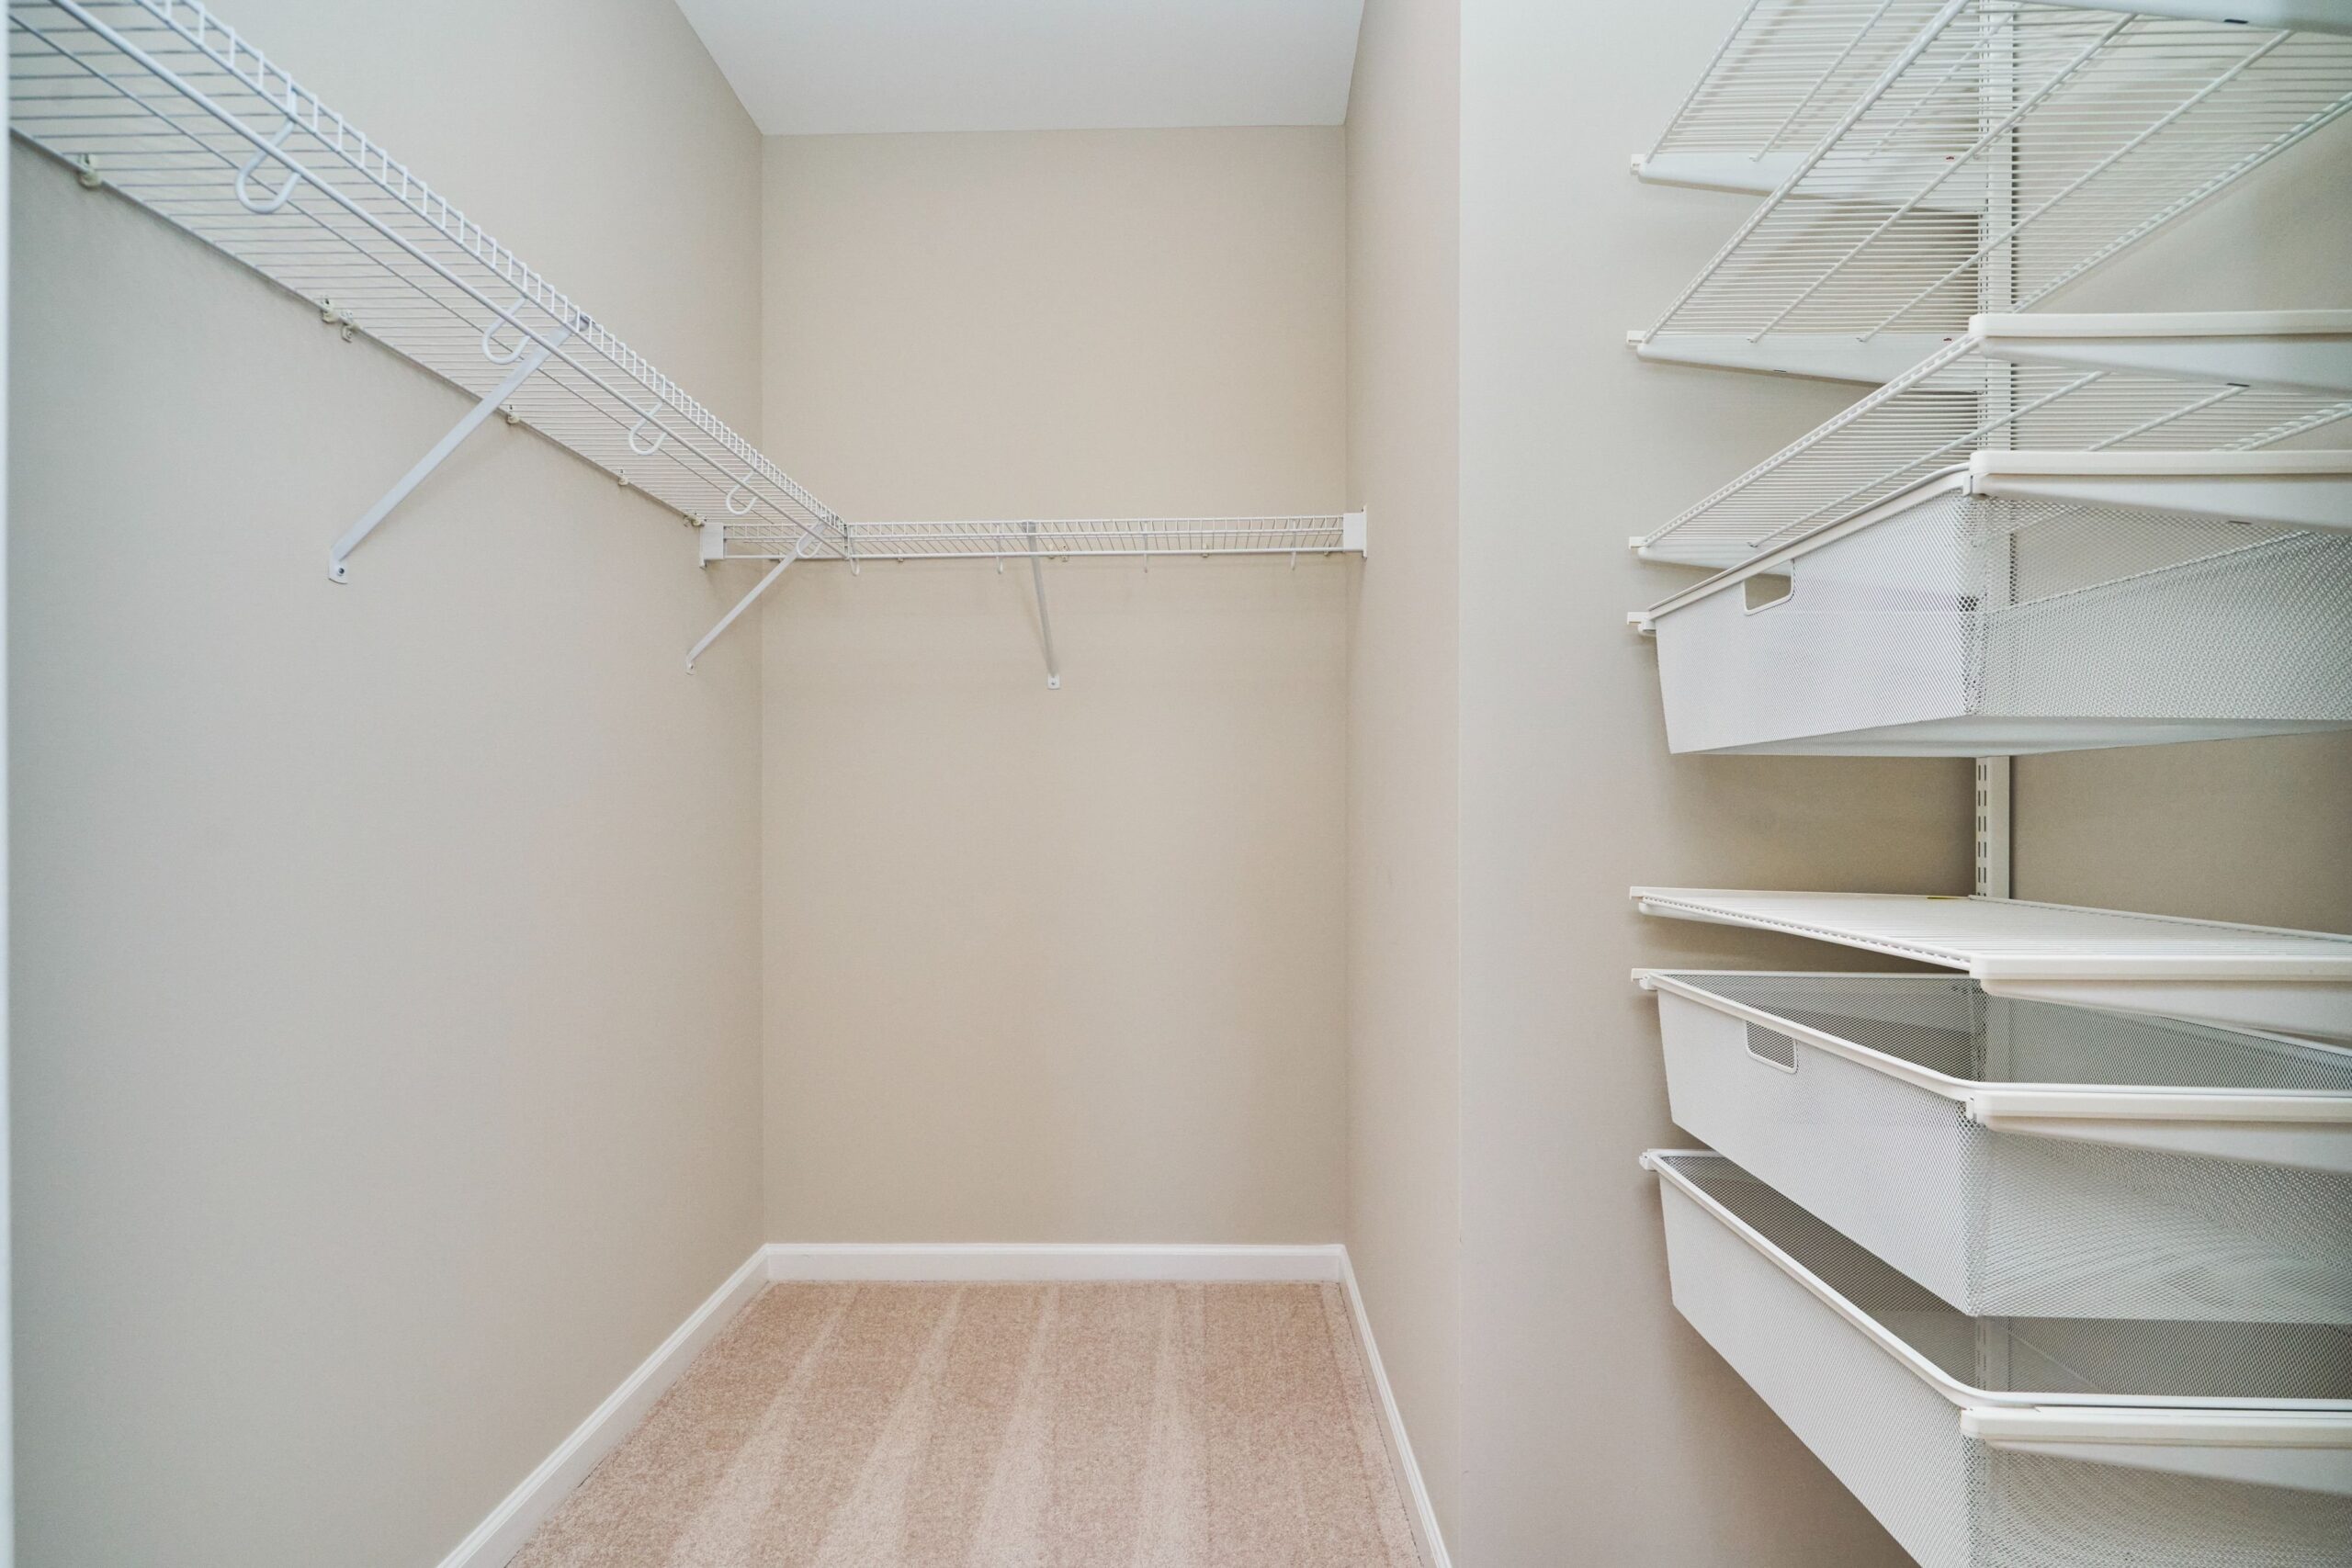 Professional interior photo of 444 W Broad St Unit 631 - showing one of the walk in closets with wire clothing rack in L shape and several wire shelves with under-drawers